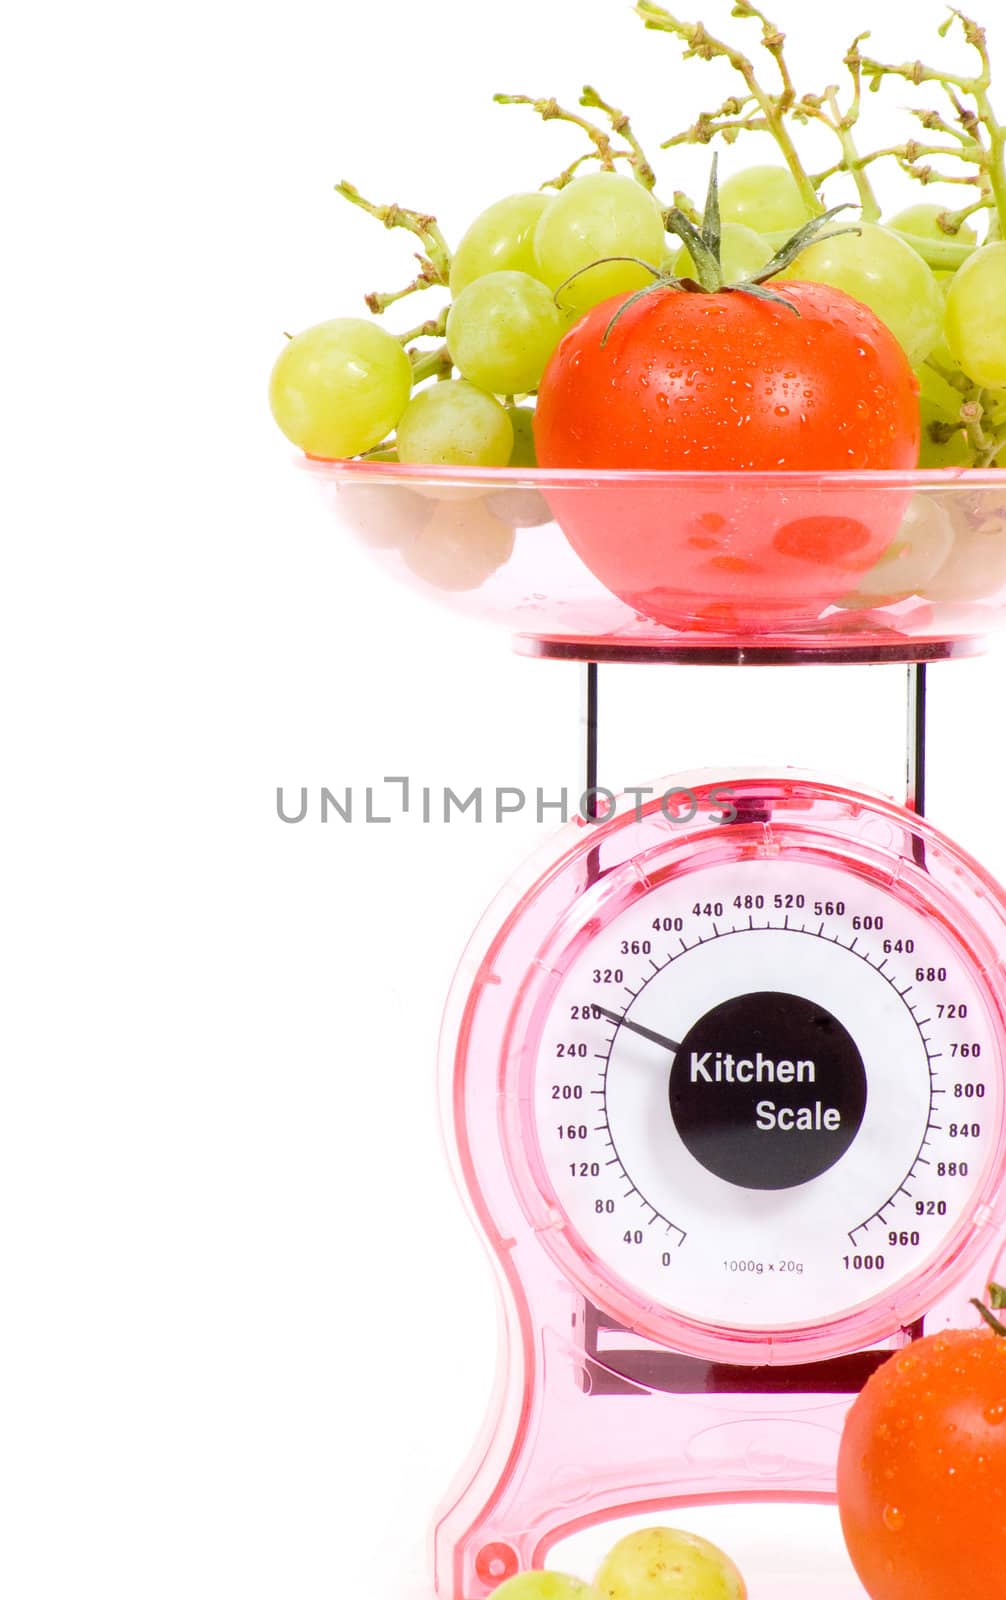 Kitchen Scales with fresh tomatoes and grapes  by ladyminnie